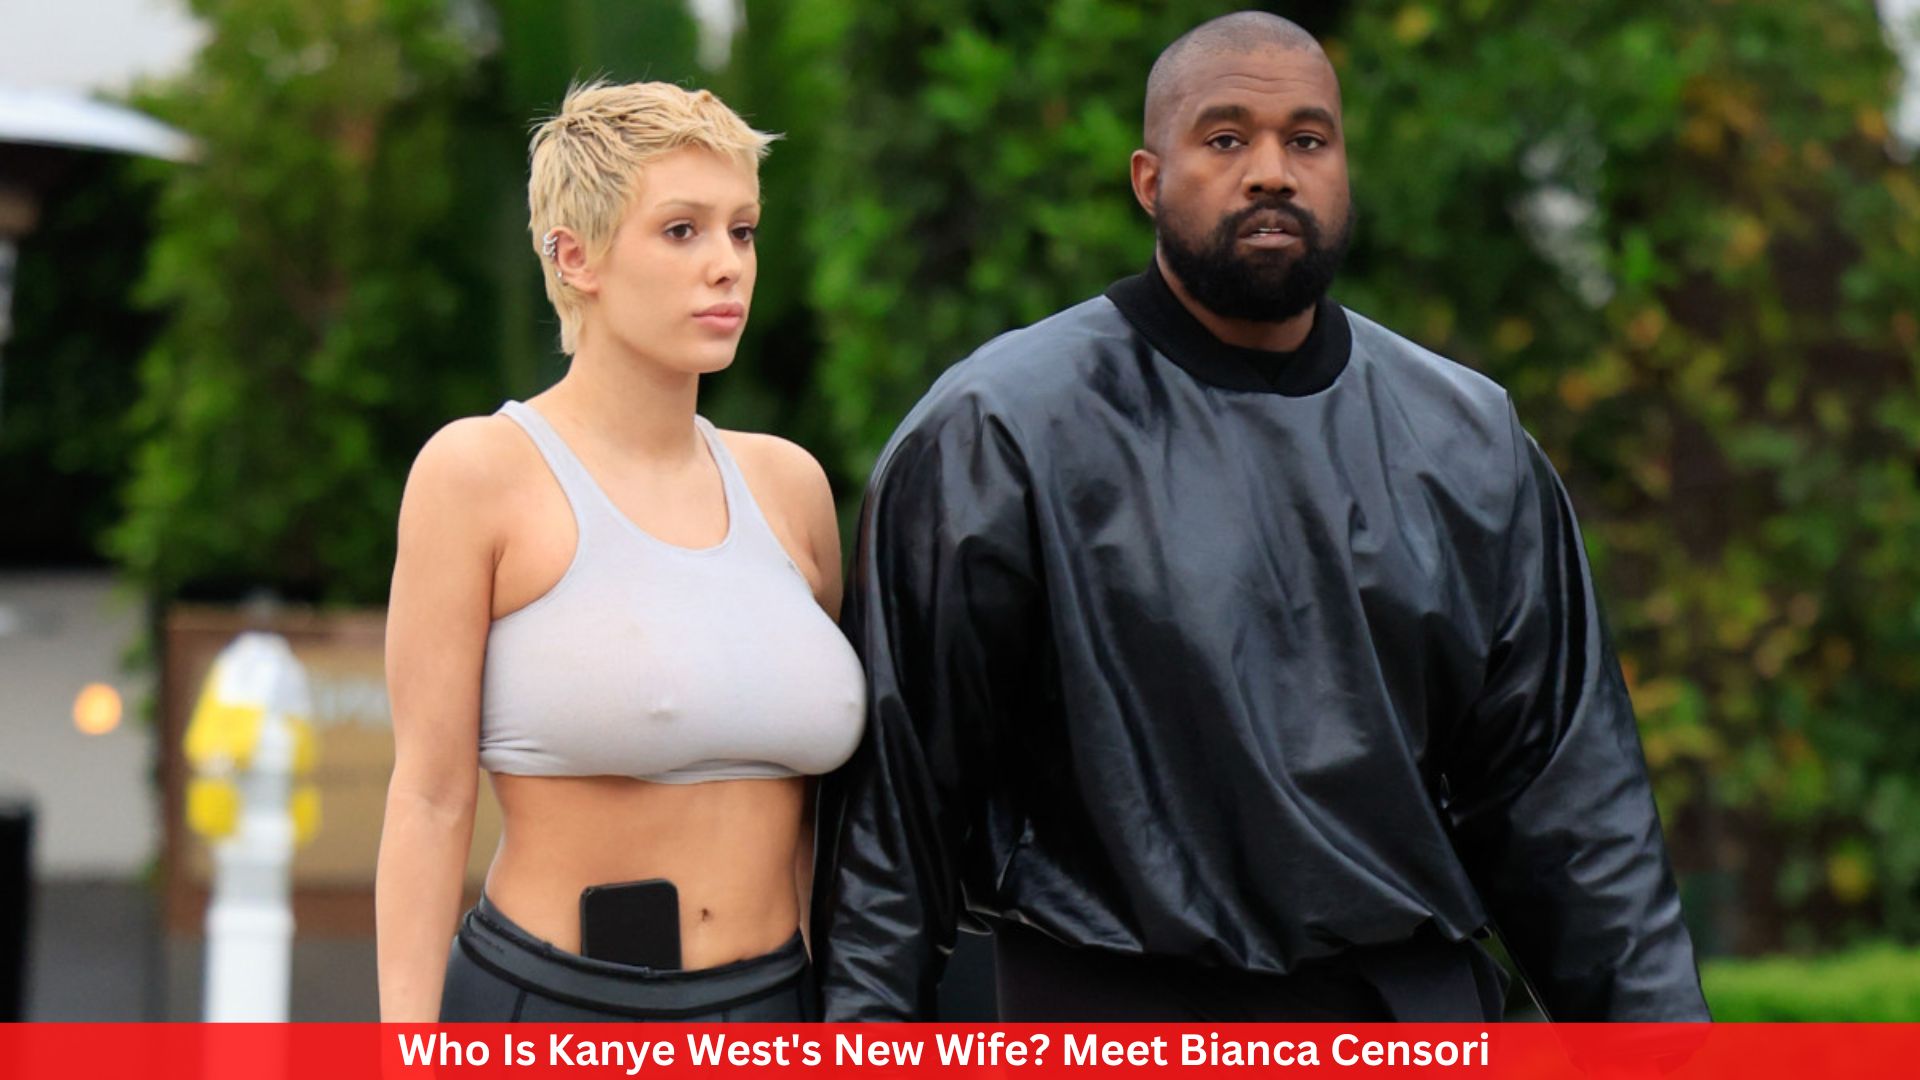 Who Is Kanye West's New Wife? Meet Bianca Censori